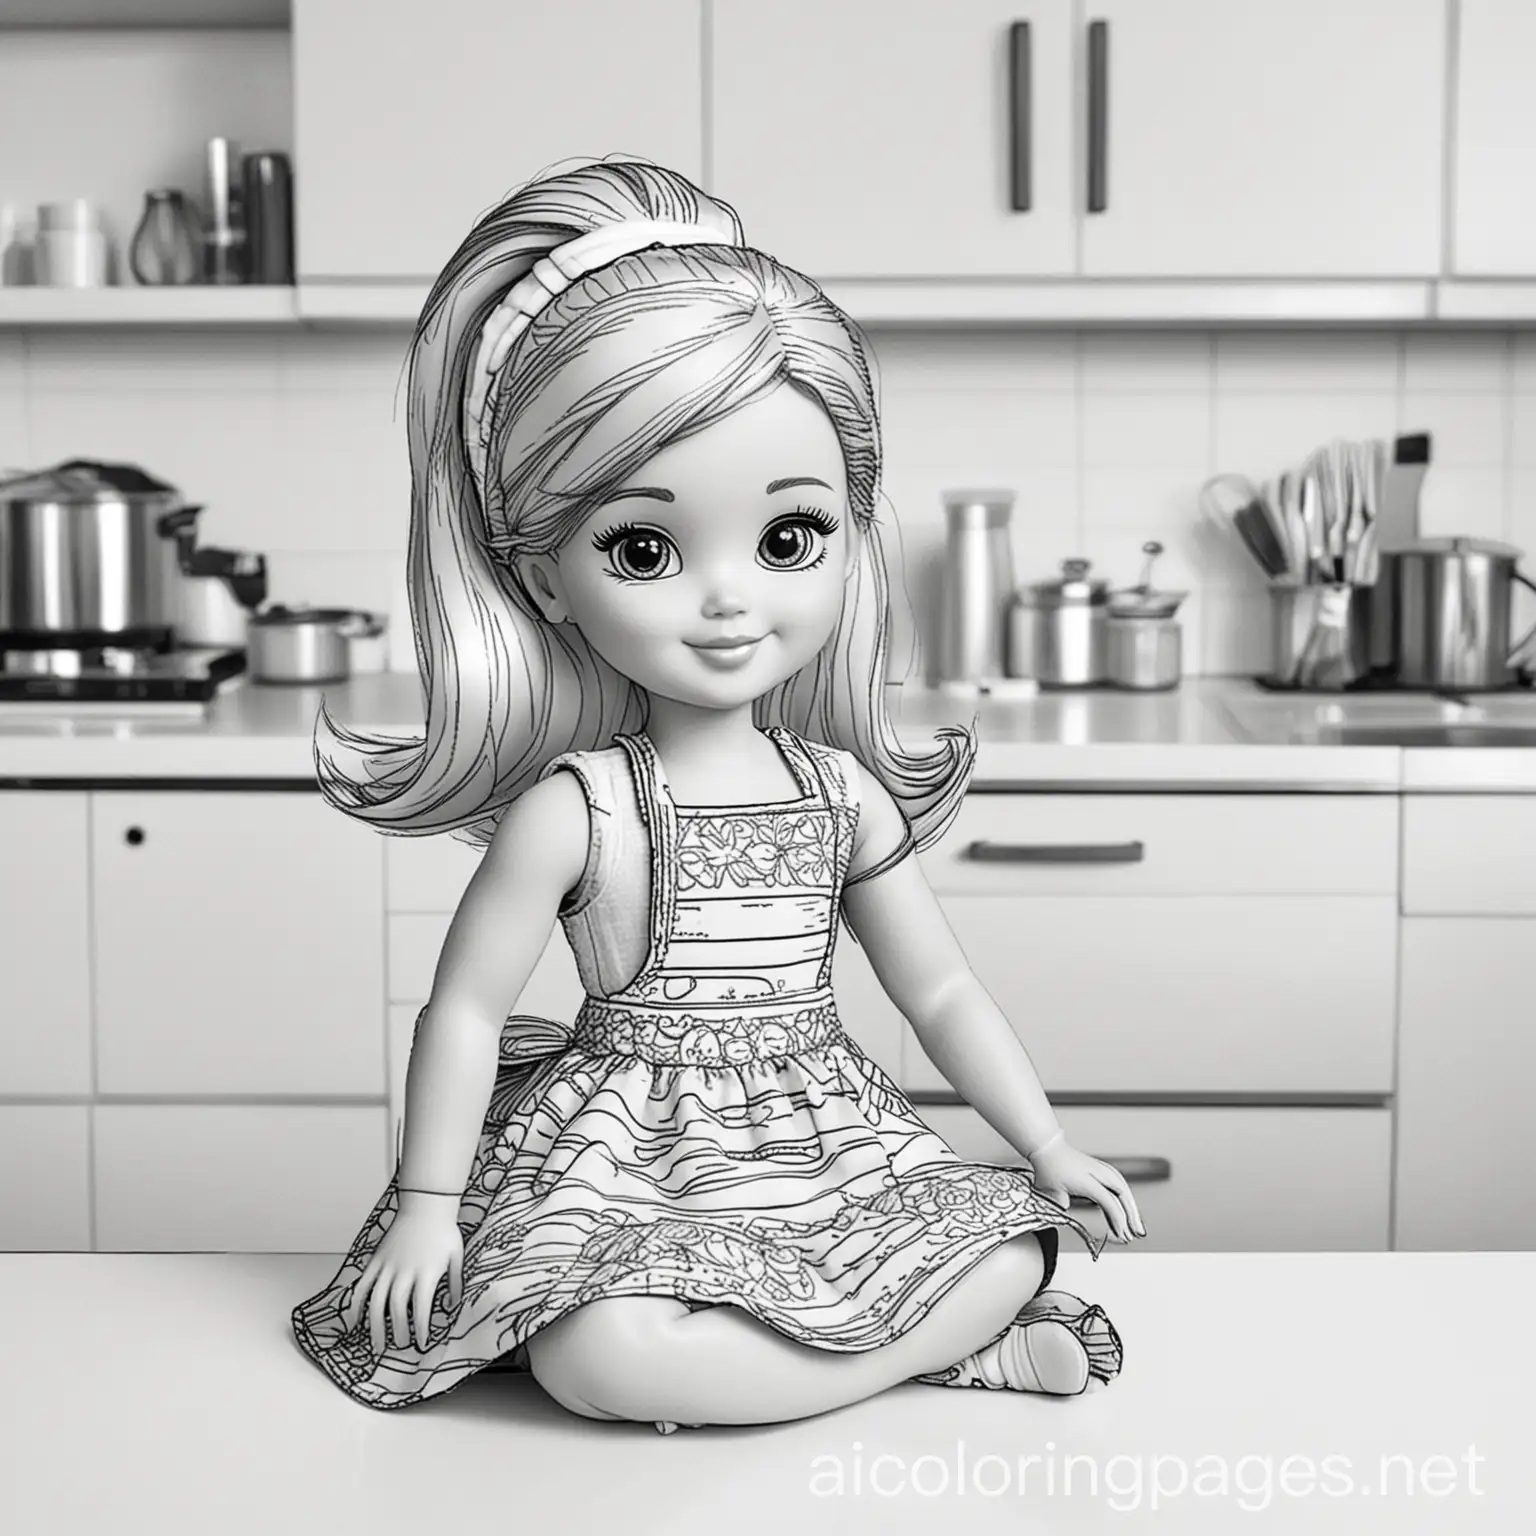 Barbie as a toddle in kitchen, Coloring Page, black and white, line art, white background, Simplicity, Ample White Space. The background of the coloring page is plain white to make it easy for young children to color within the lines. The outlines of all the subjects are easy to distinguish, making it simple for kids to color without too much difficulty